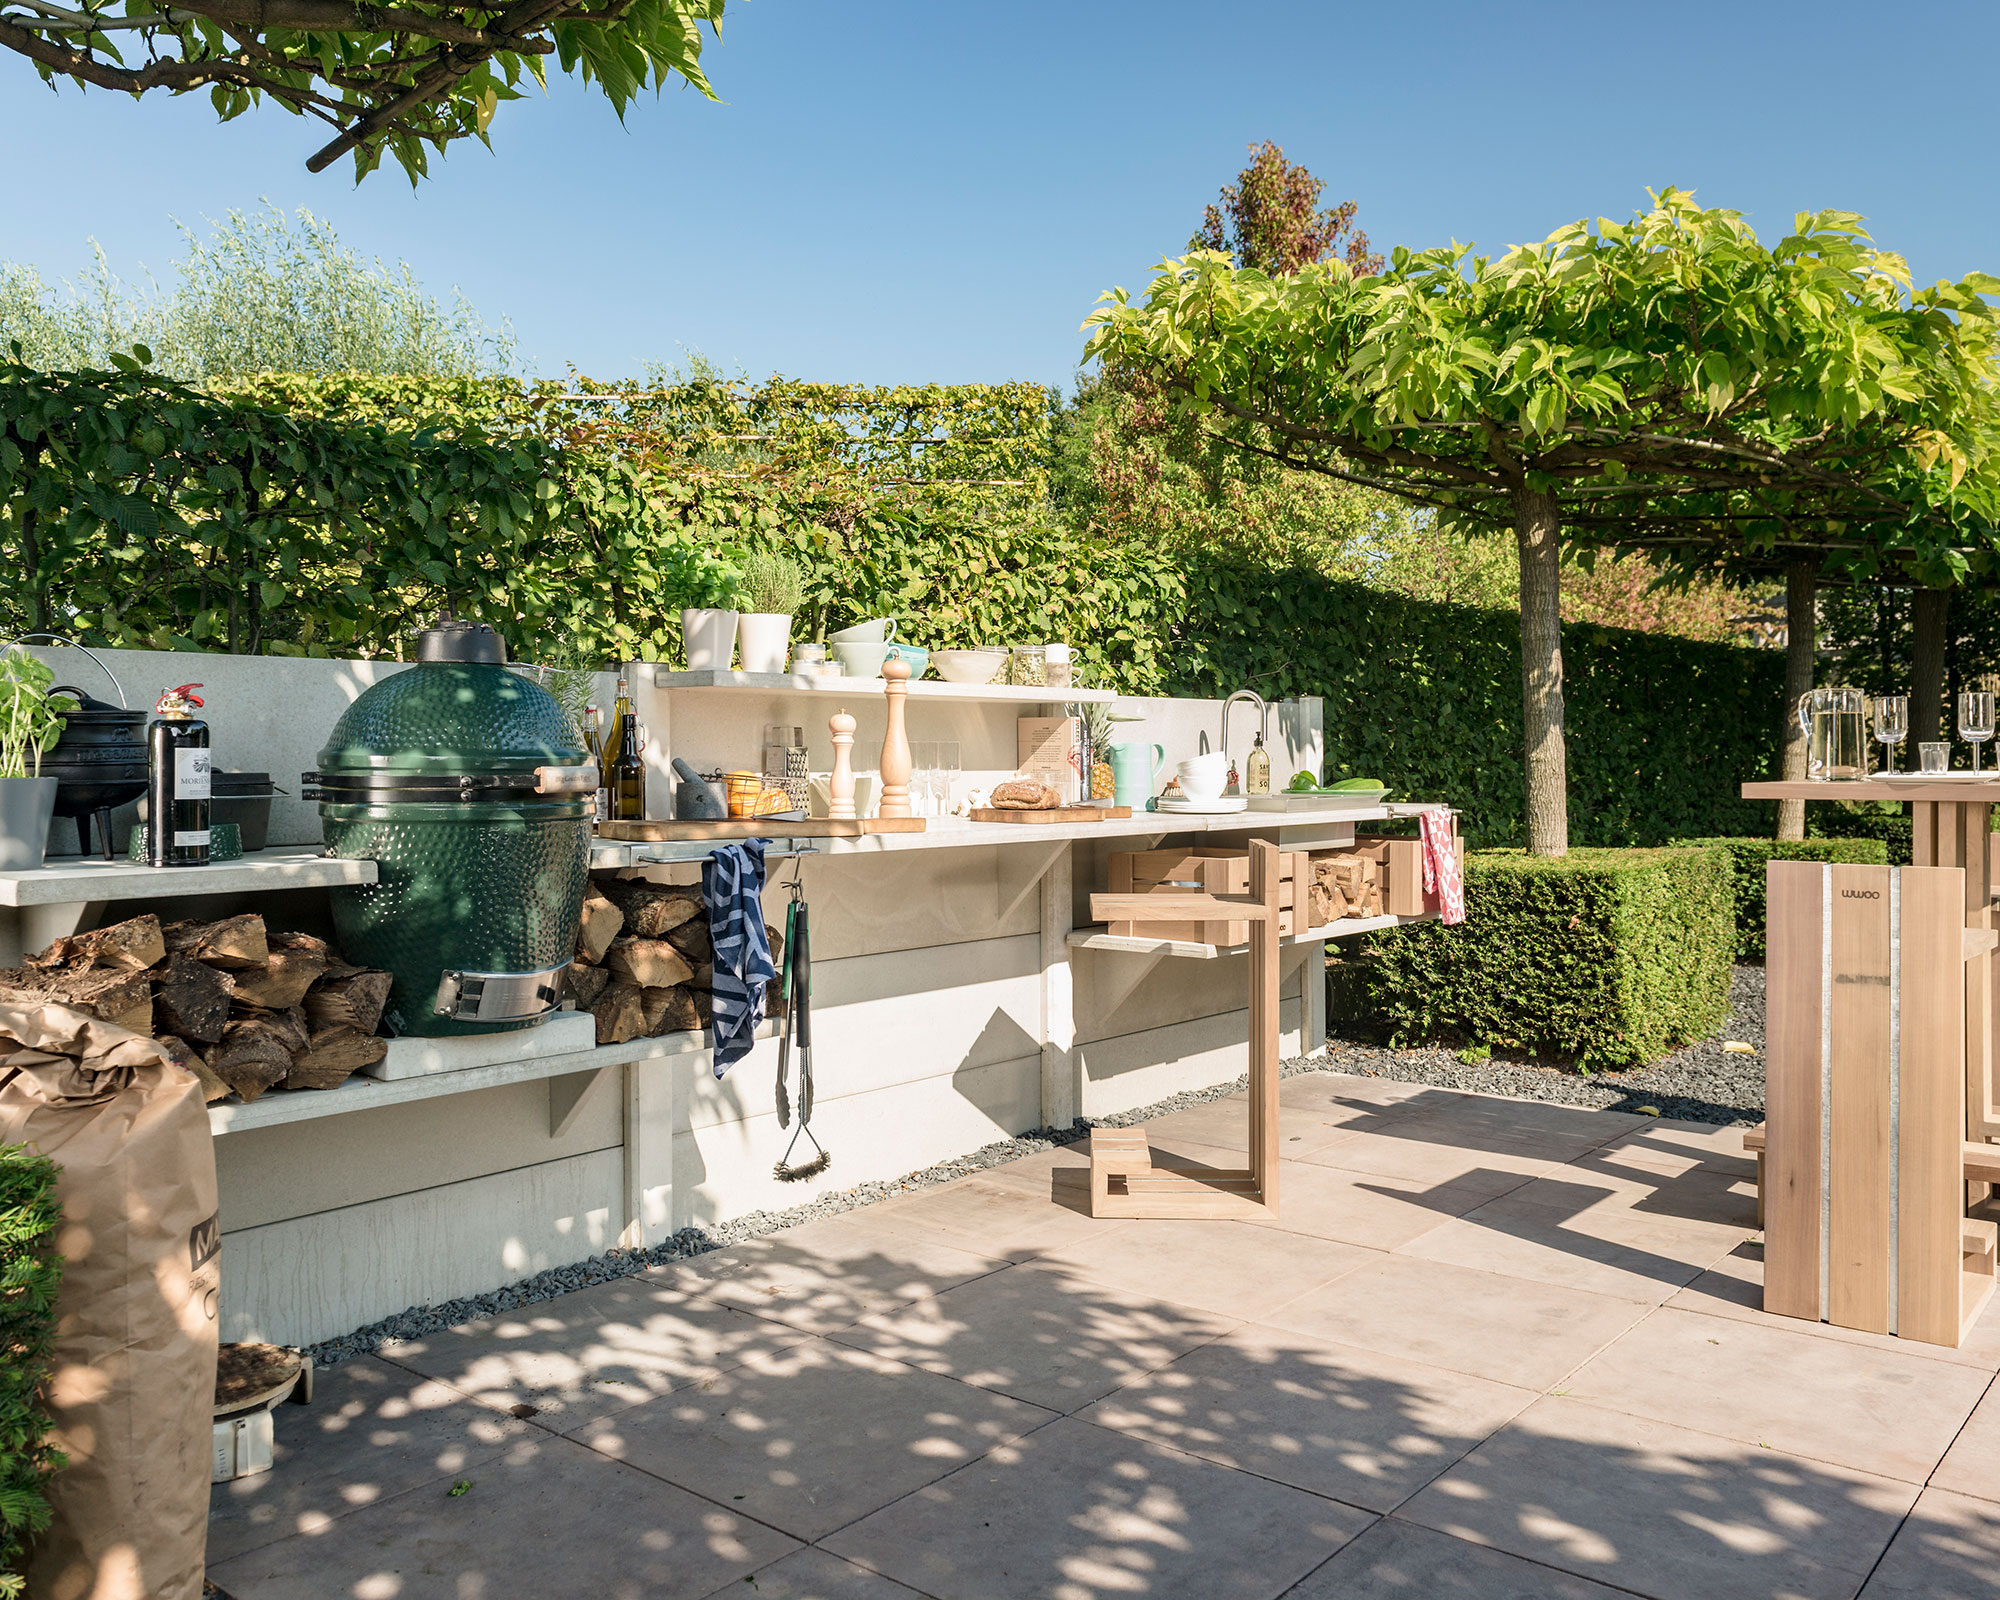 How Much Does An Outdoor Kitchen Cost, How Much Did Your Outdoor Kitchen Cost